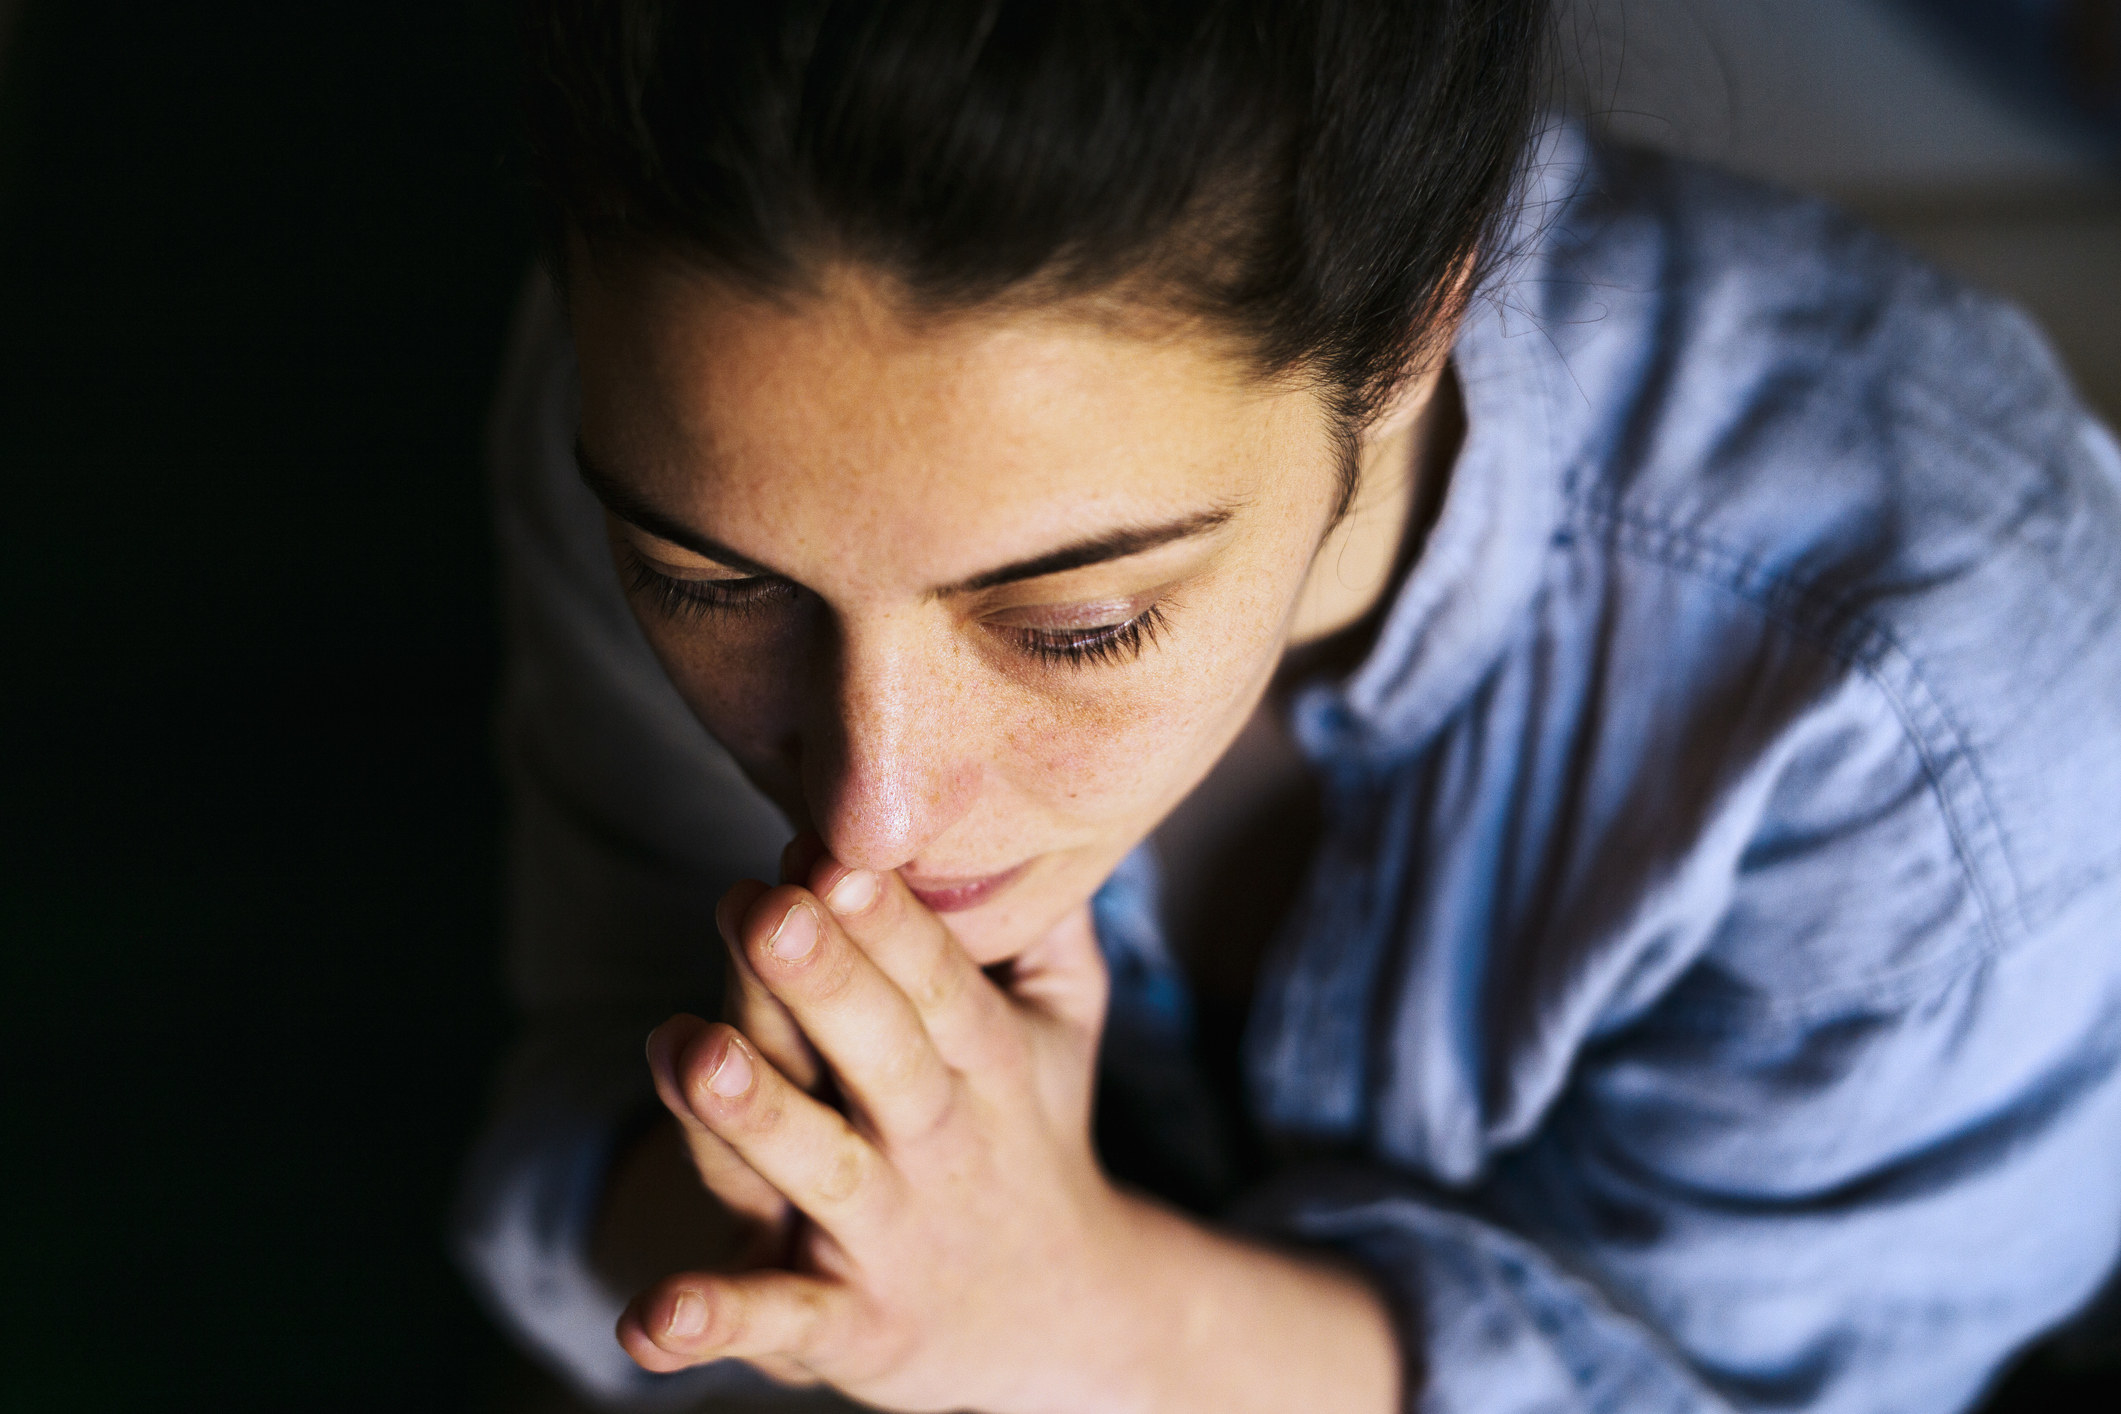 A concerned woman sits with her hands clasped in prayer